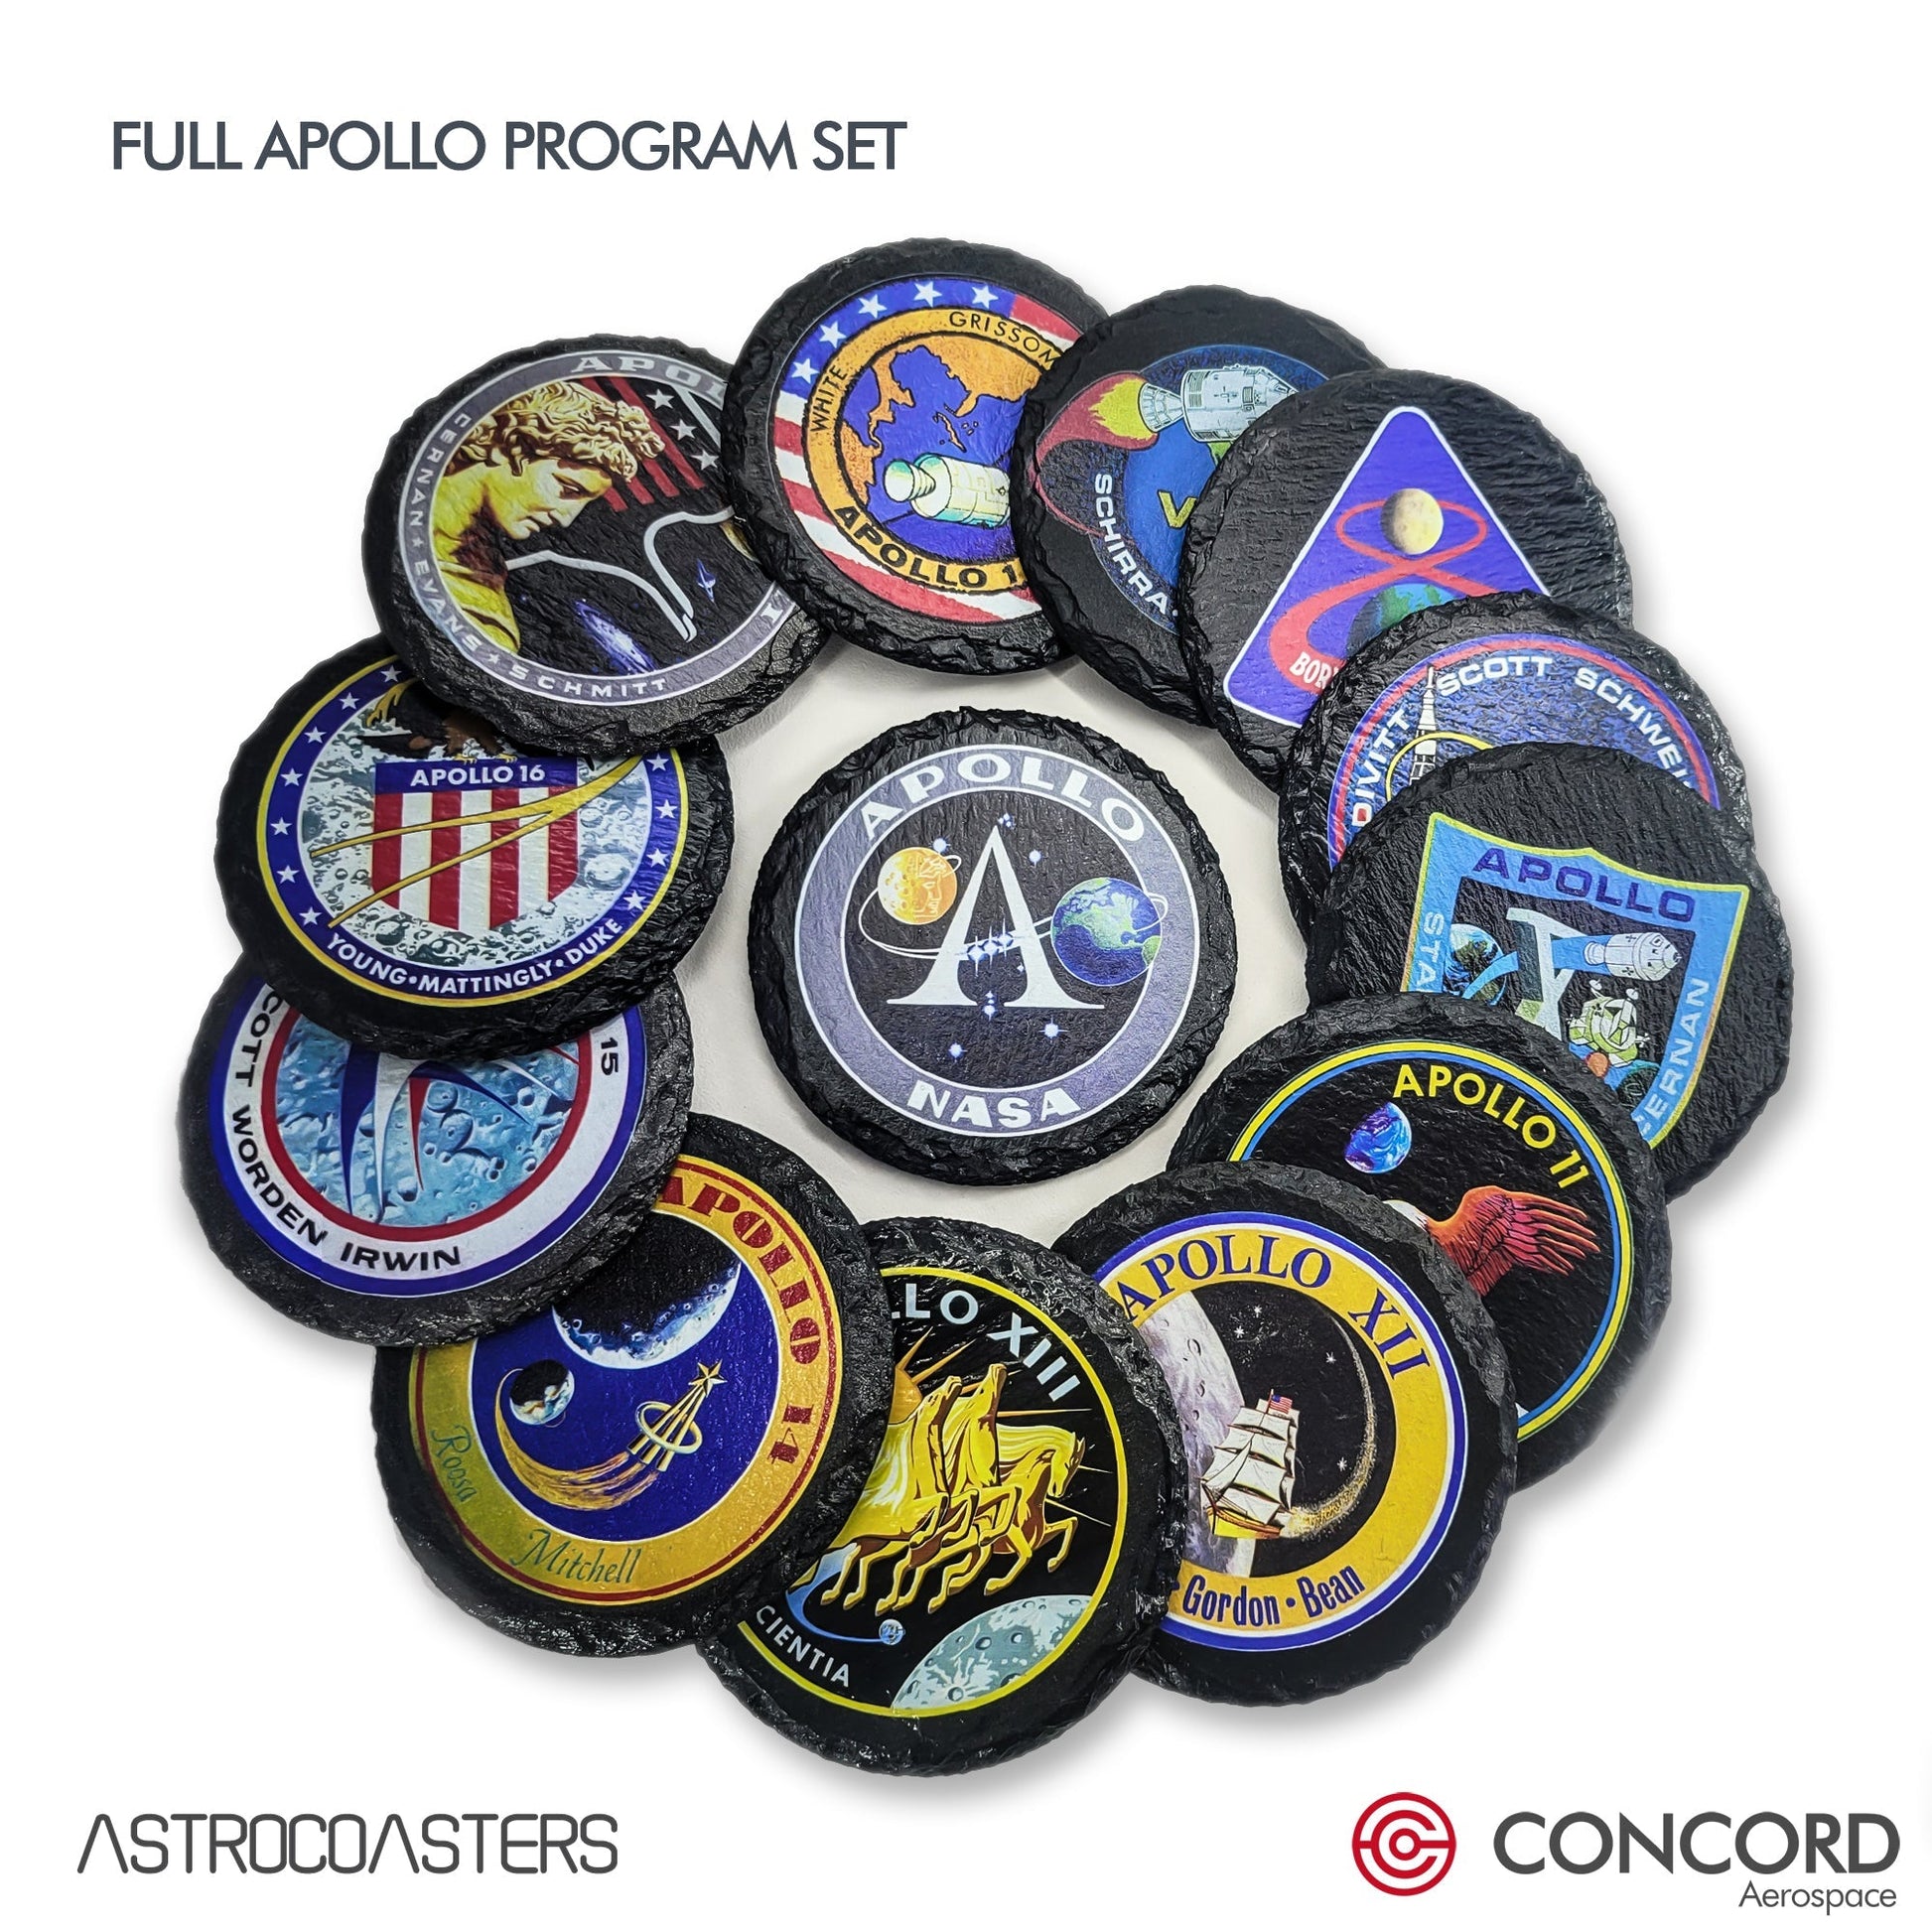 STS - 2 SPACE SHUTTLE - SLATE COASTER - Concord Aerospace Concord Aerospace Concord Aerospace Coasters